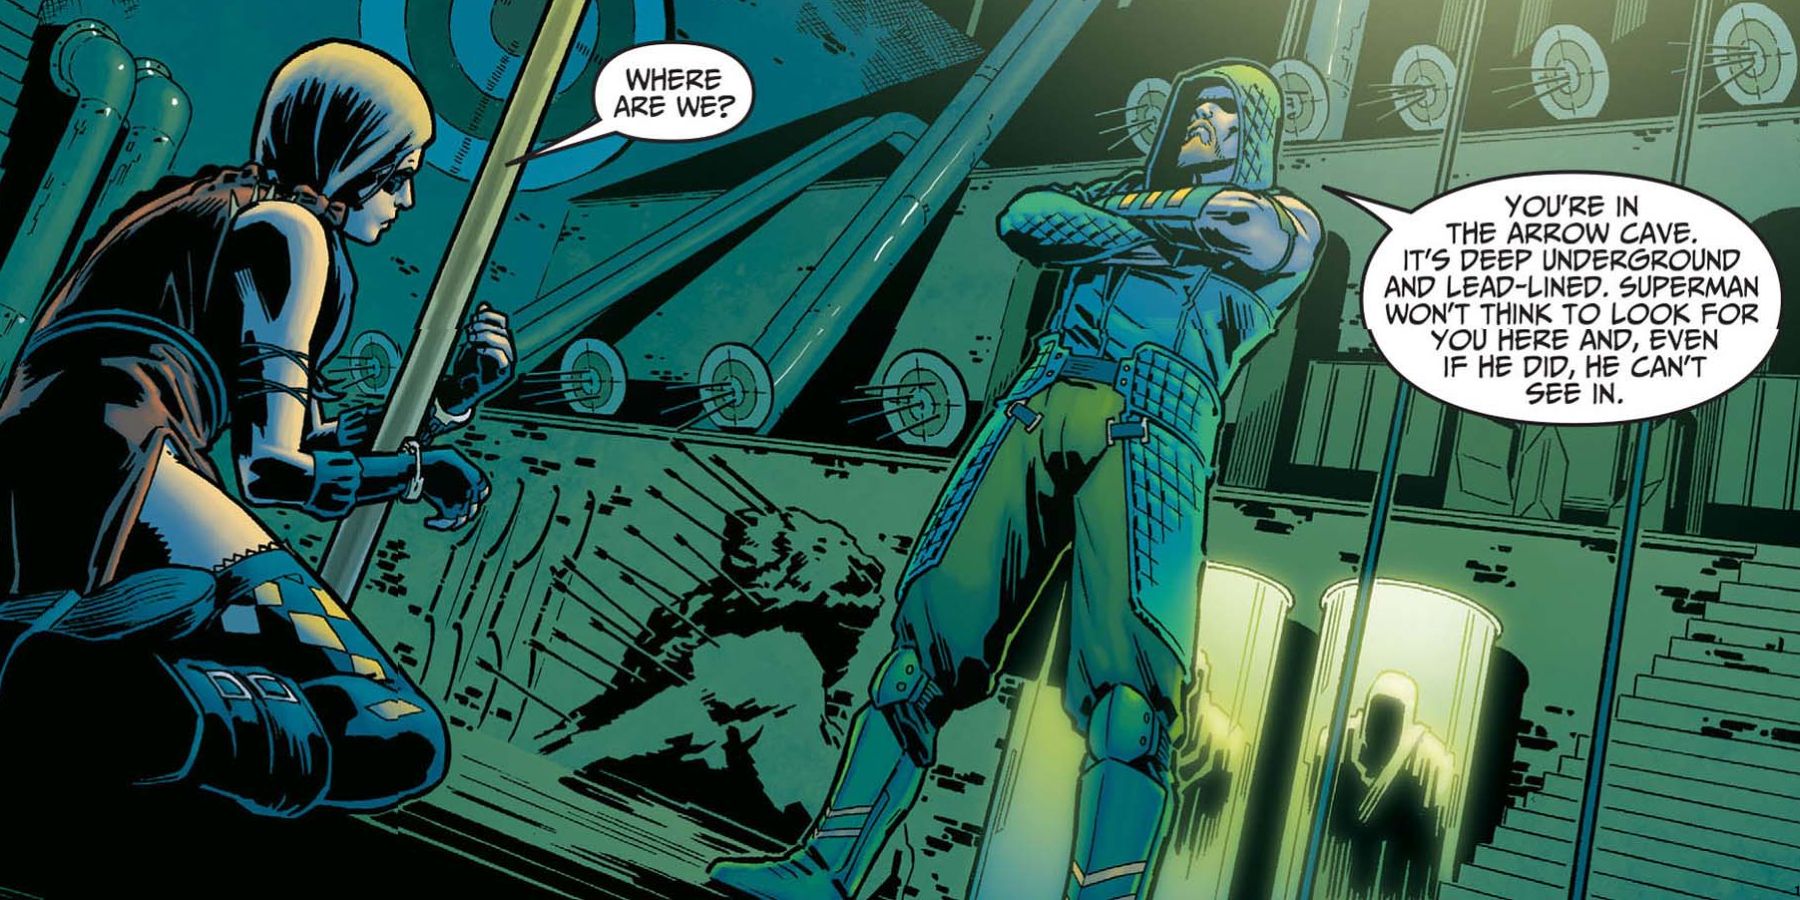 Green Arrow talking to Harley Quinn in the Arrow Cave AKA Quiver in Injustice comics